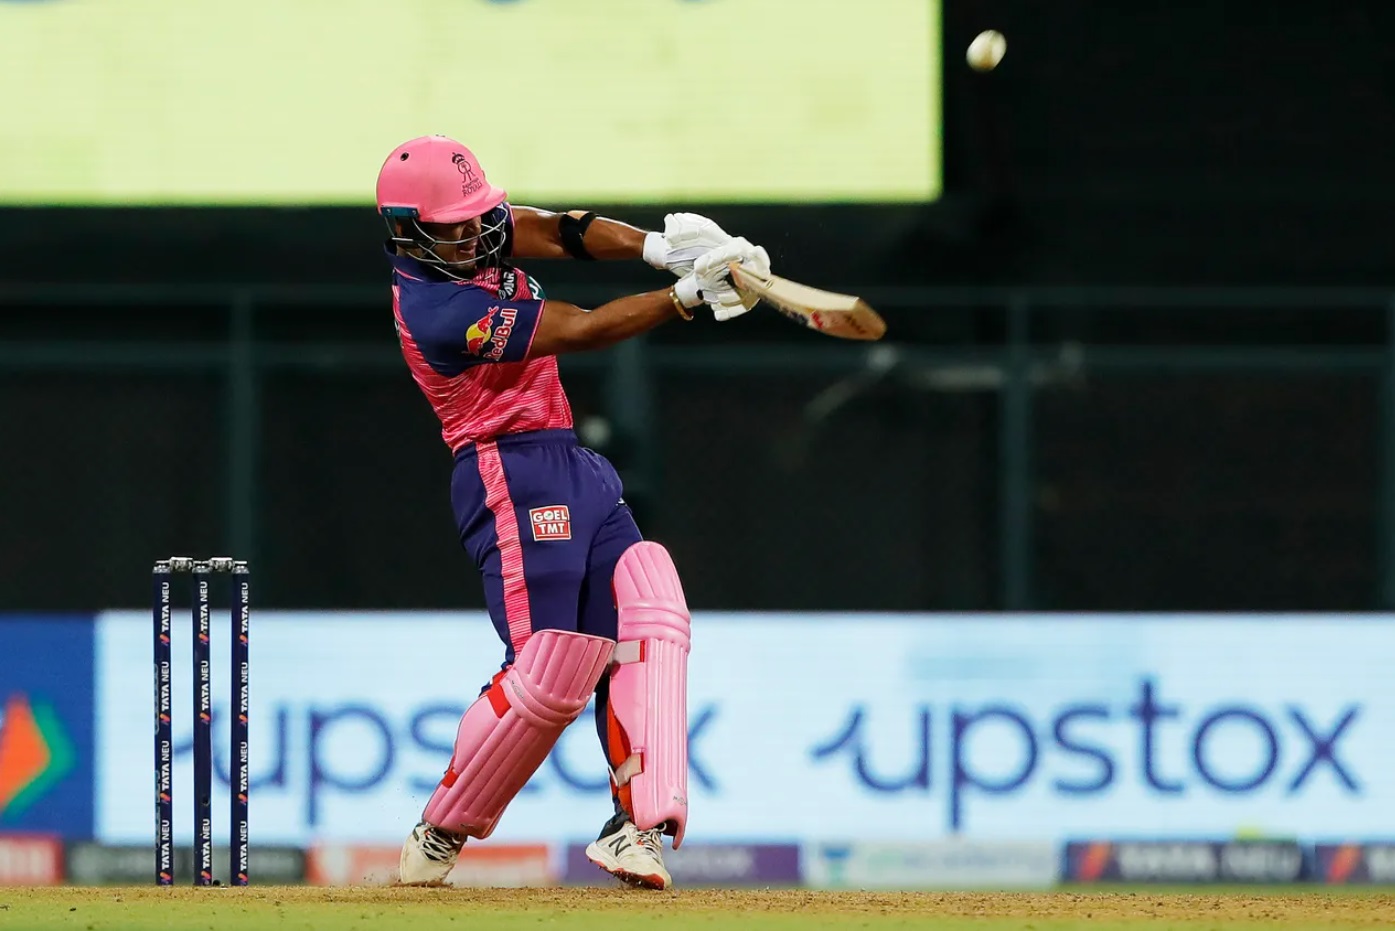 IPL 2022, KKR vs RR | Twitter reacts as Riyan Parag hits a monstrous six into the second tier